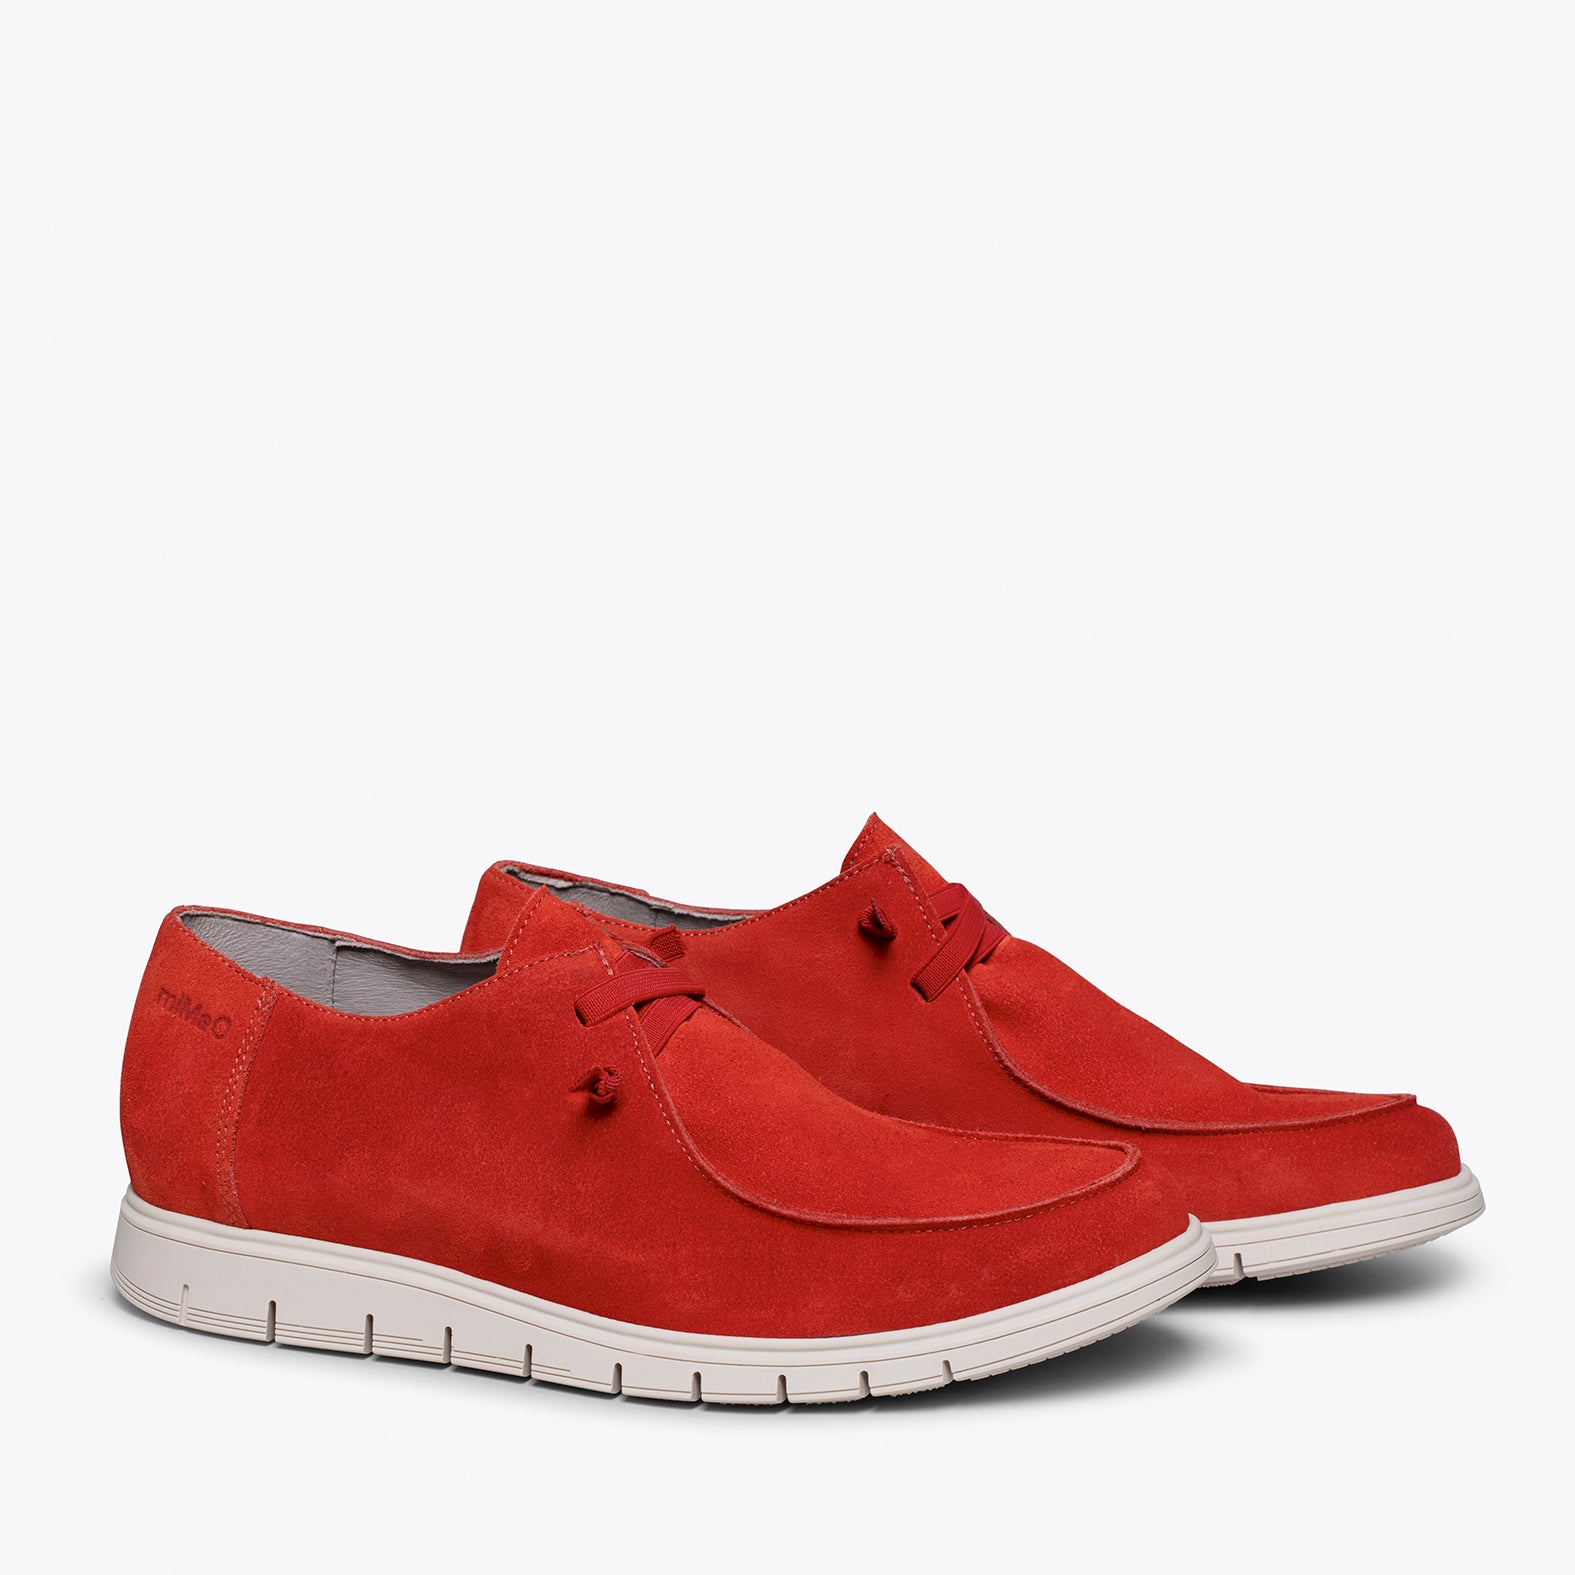 DUBLIN - Chaussures casual ROUGE pour homme